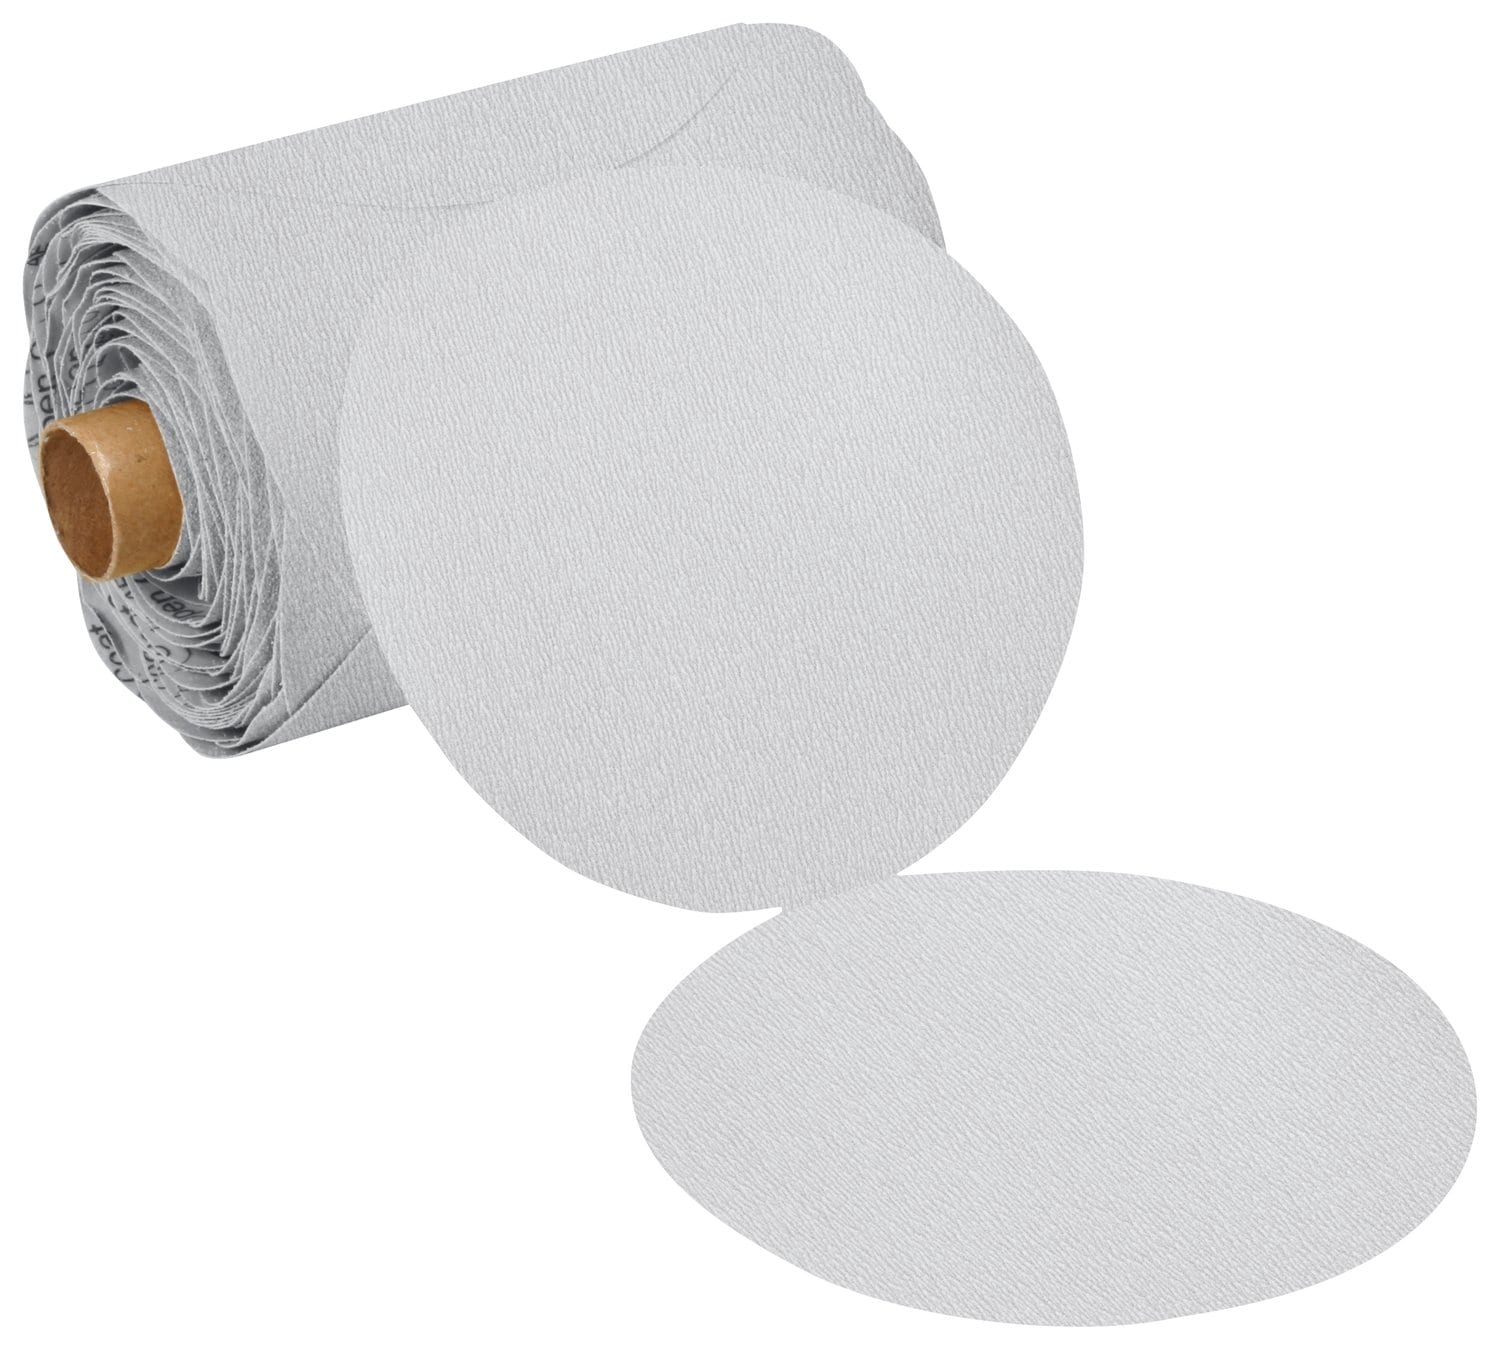 7100207773 - 3M Stikit Paper Disc Roll 426U, 120 A-weight, Config